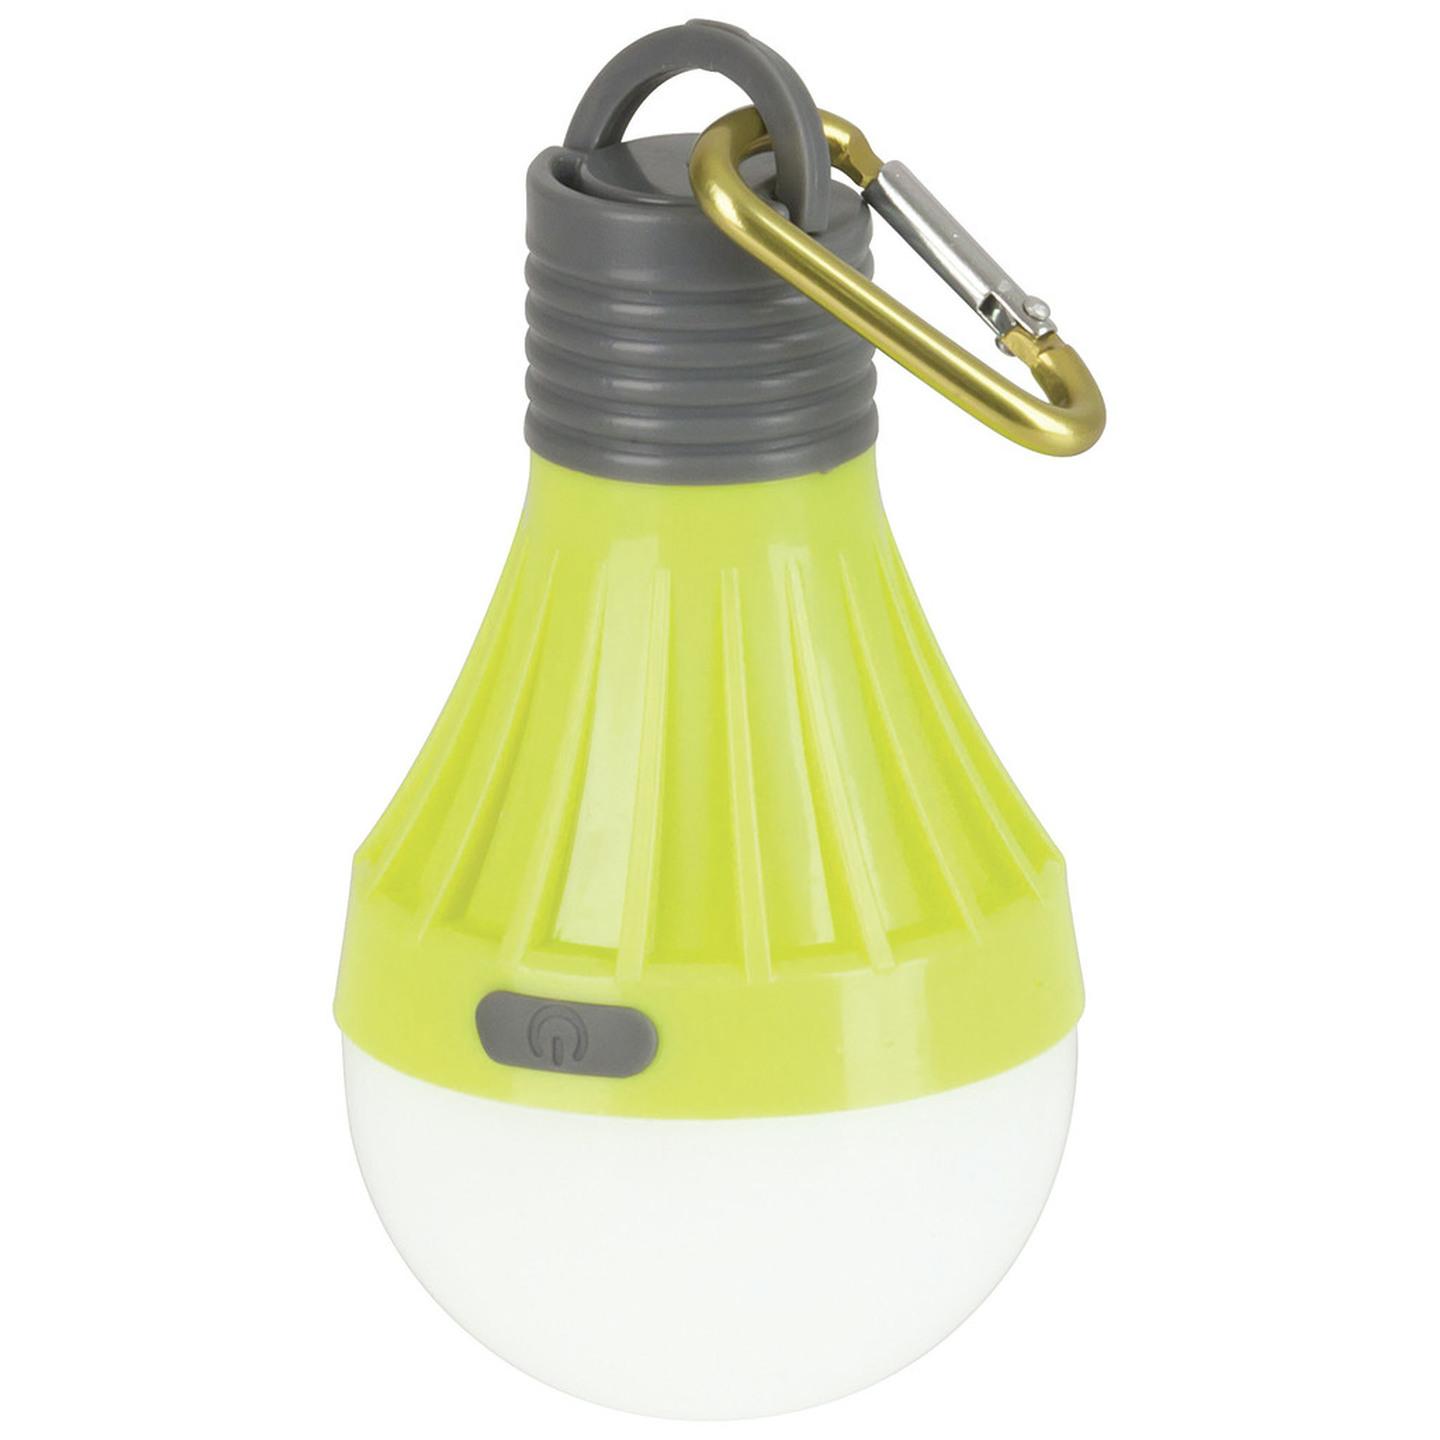 Camp Light Globe 0.5W with Carabiner